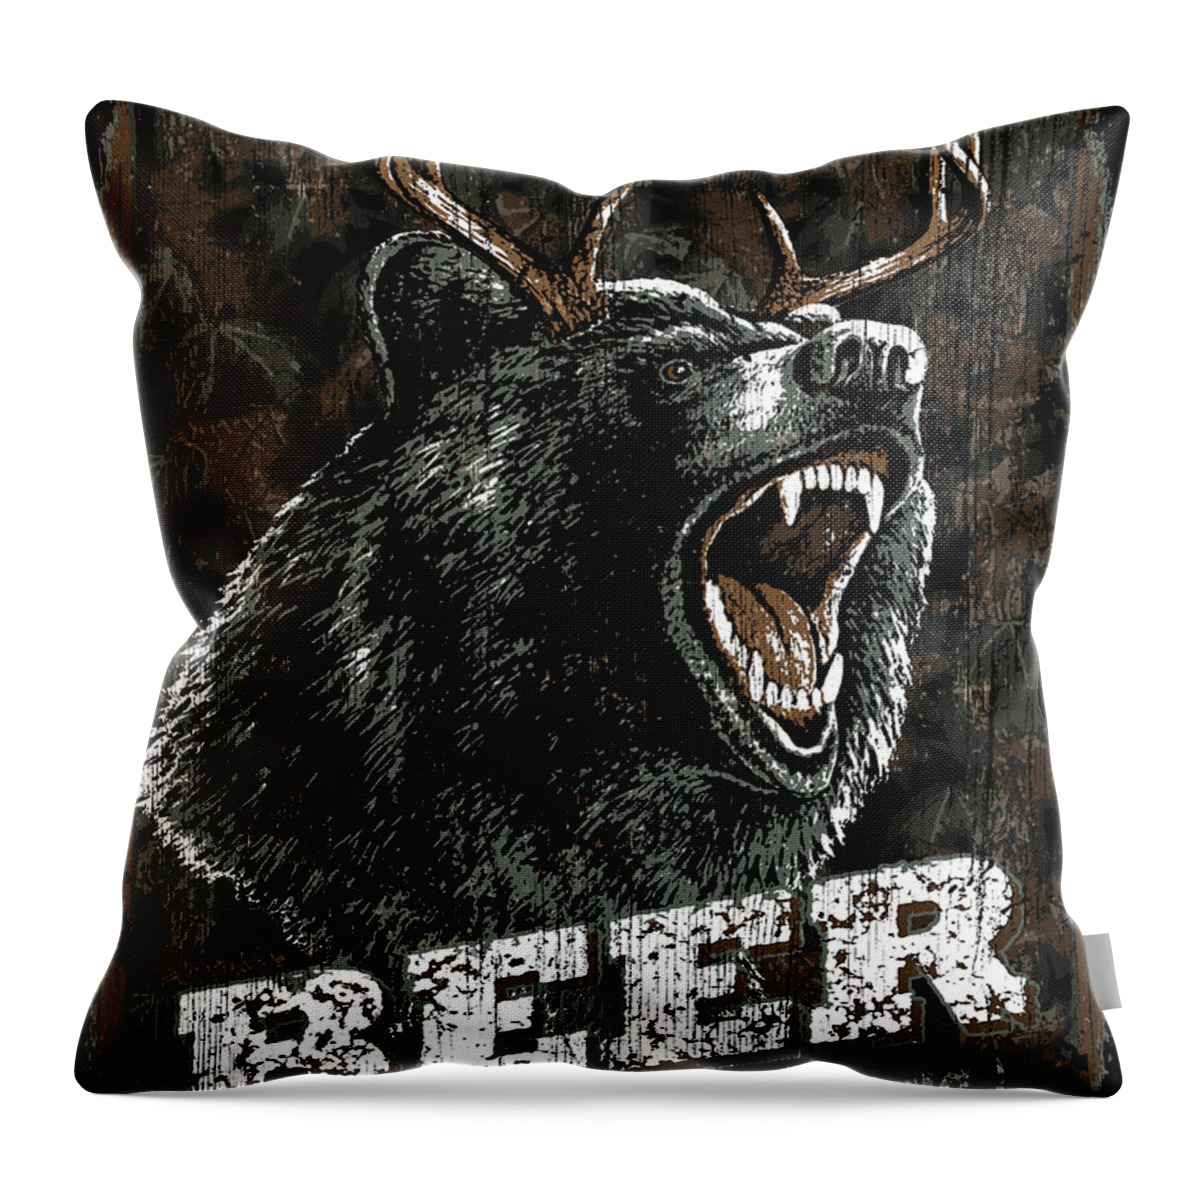 Robert Schmidt Throw Pillow featuring the painting Beer Bear by JQ Licensing